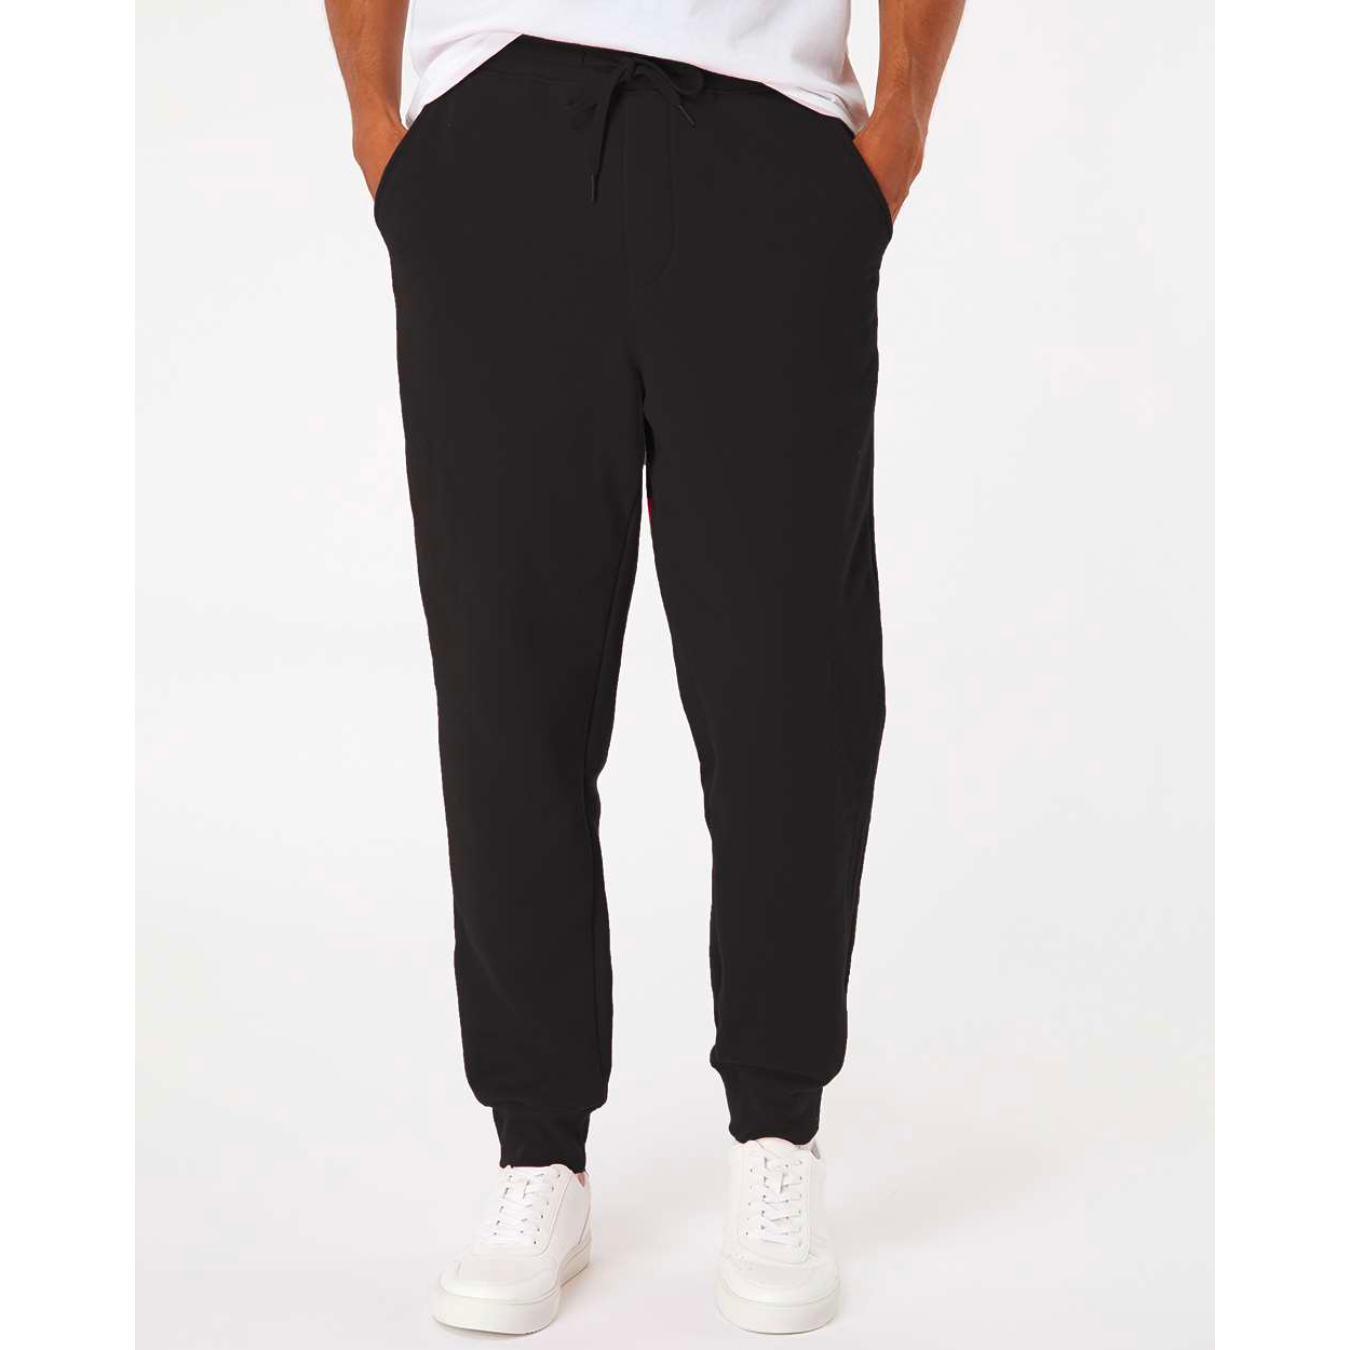 Independent Trading Co - Midweight Fleece Pants (INCLUDES 1-SIDED PRINT)